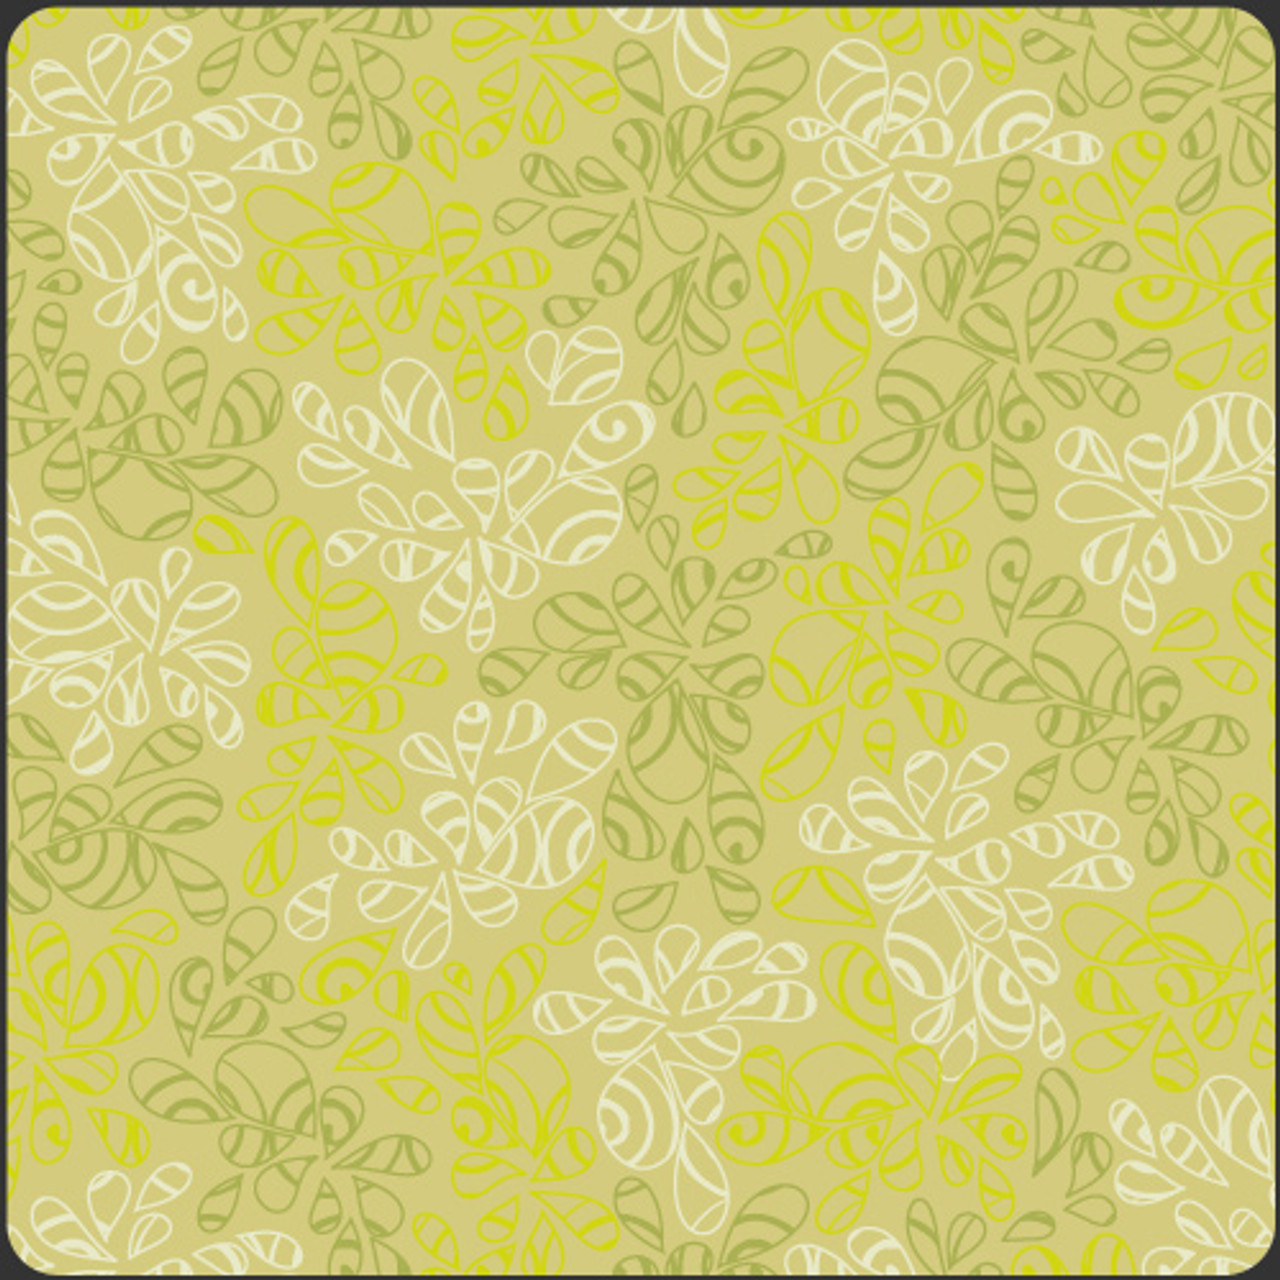 AGF Fabric Nature Pistachio NE-122, By-the-yard.